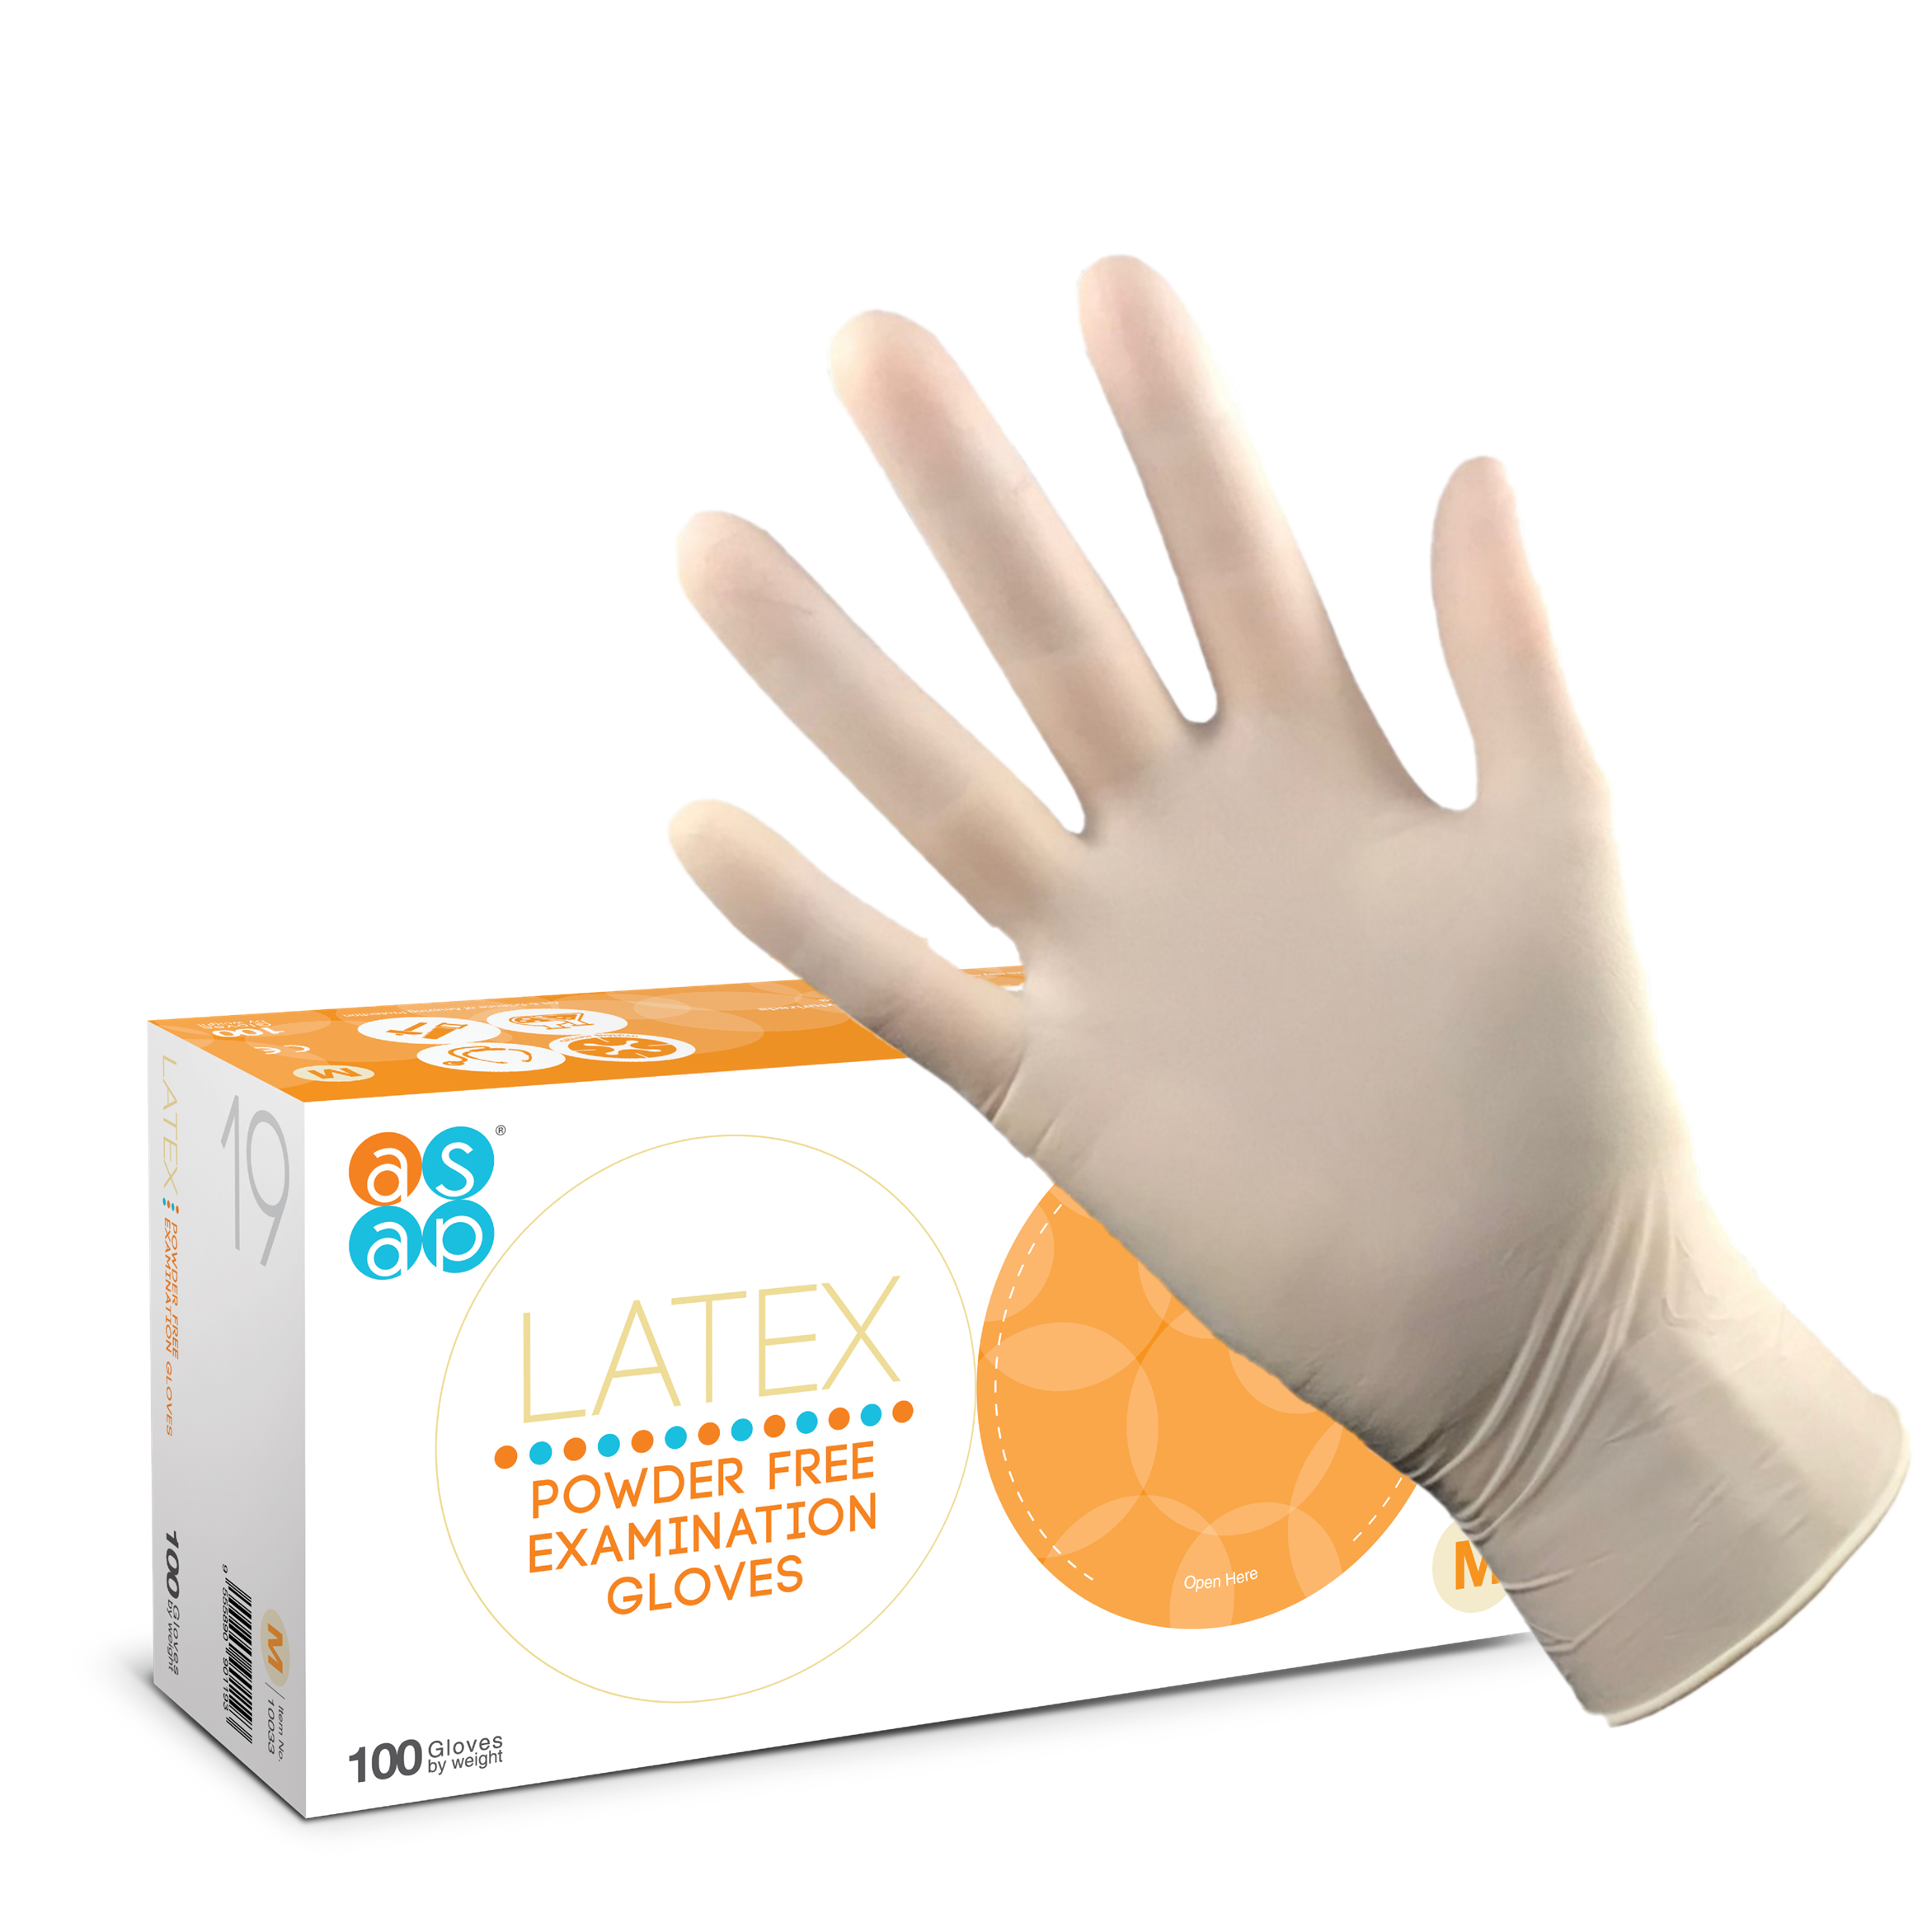 Latex Powder Free Gloves Pack of 100 Large